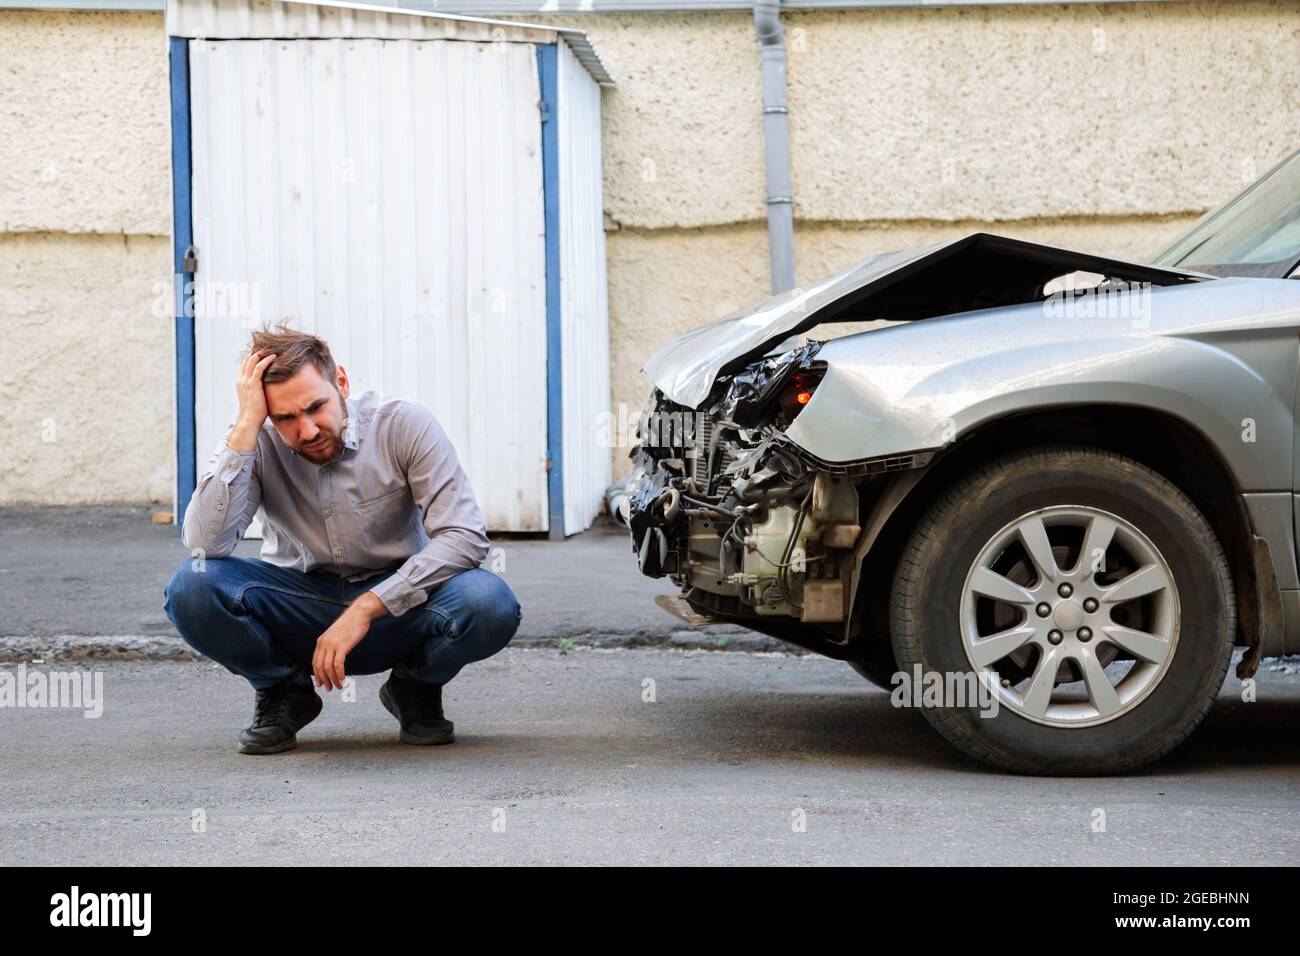 Man holding his head and suffering upset frustrated after car accident. Driver holds head near the wrecked car after car accident on the road Stock Photo